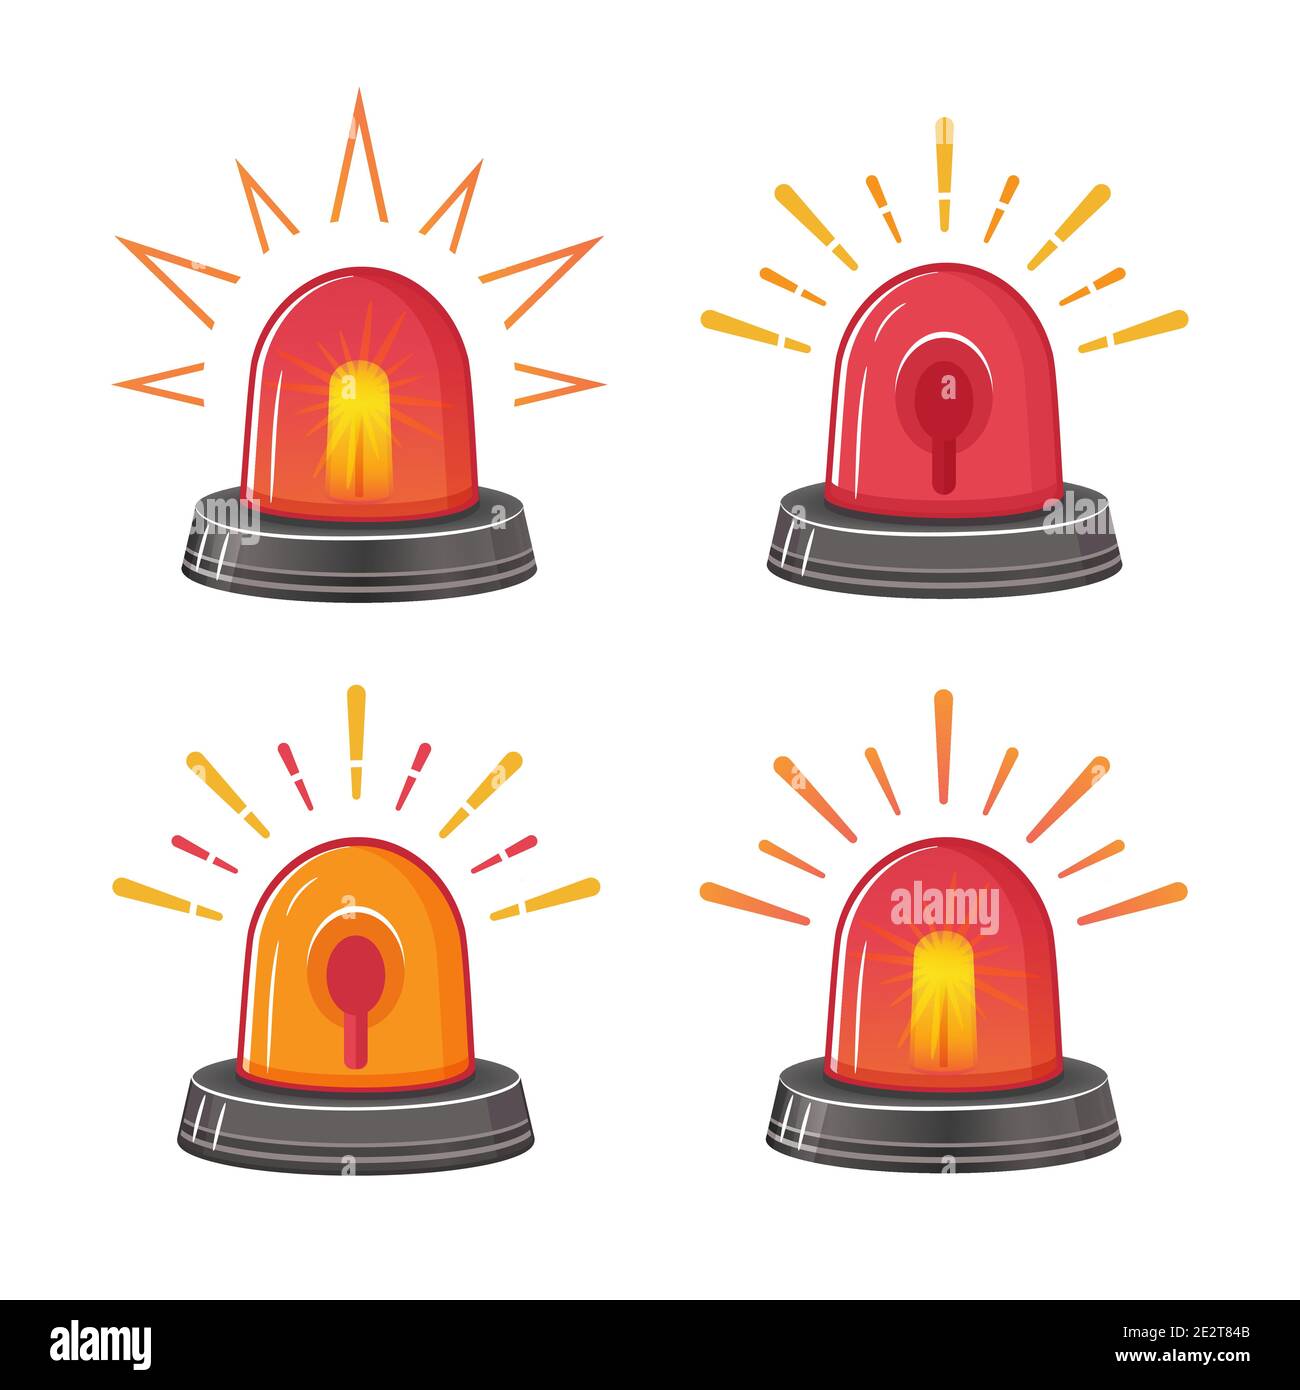 Emergency red siren icon set. Ambulance or police flasher. Alarm fire siren. Rotating lamp for cars. Alert flashing beacon. Warning sign. Vector Stock Vector